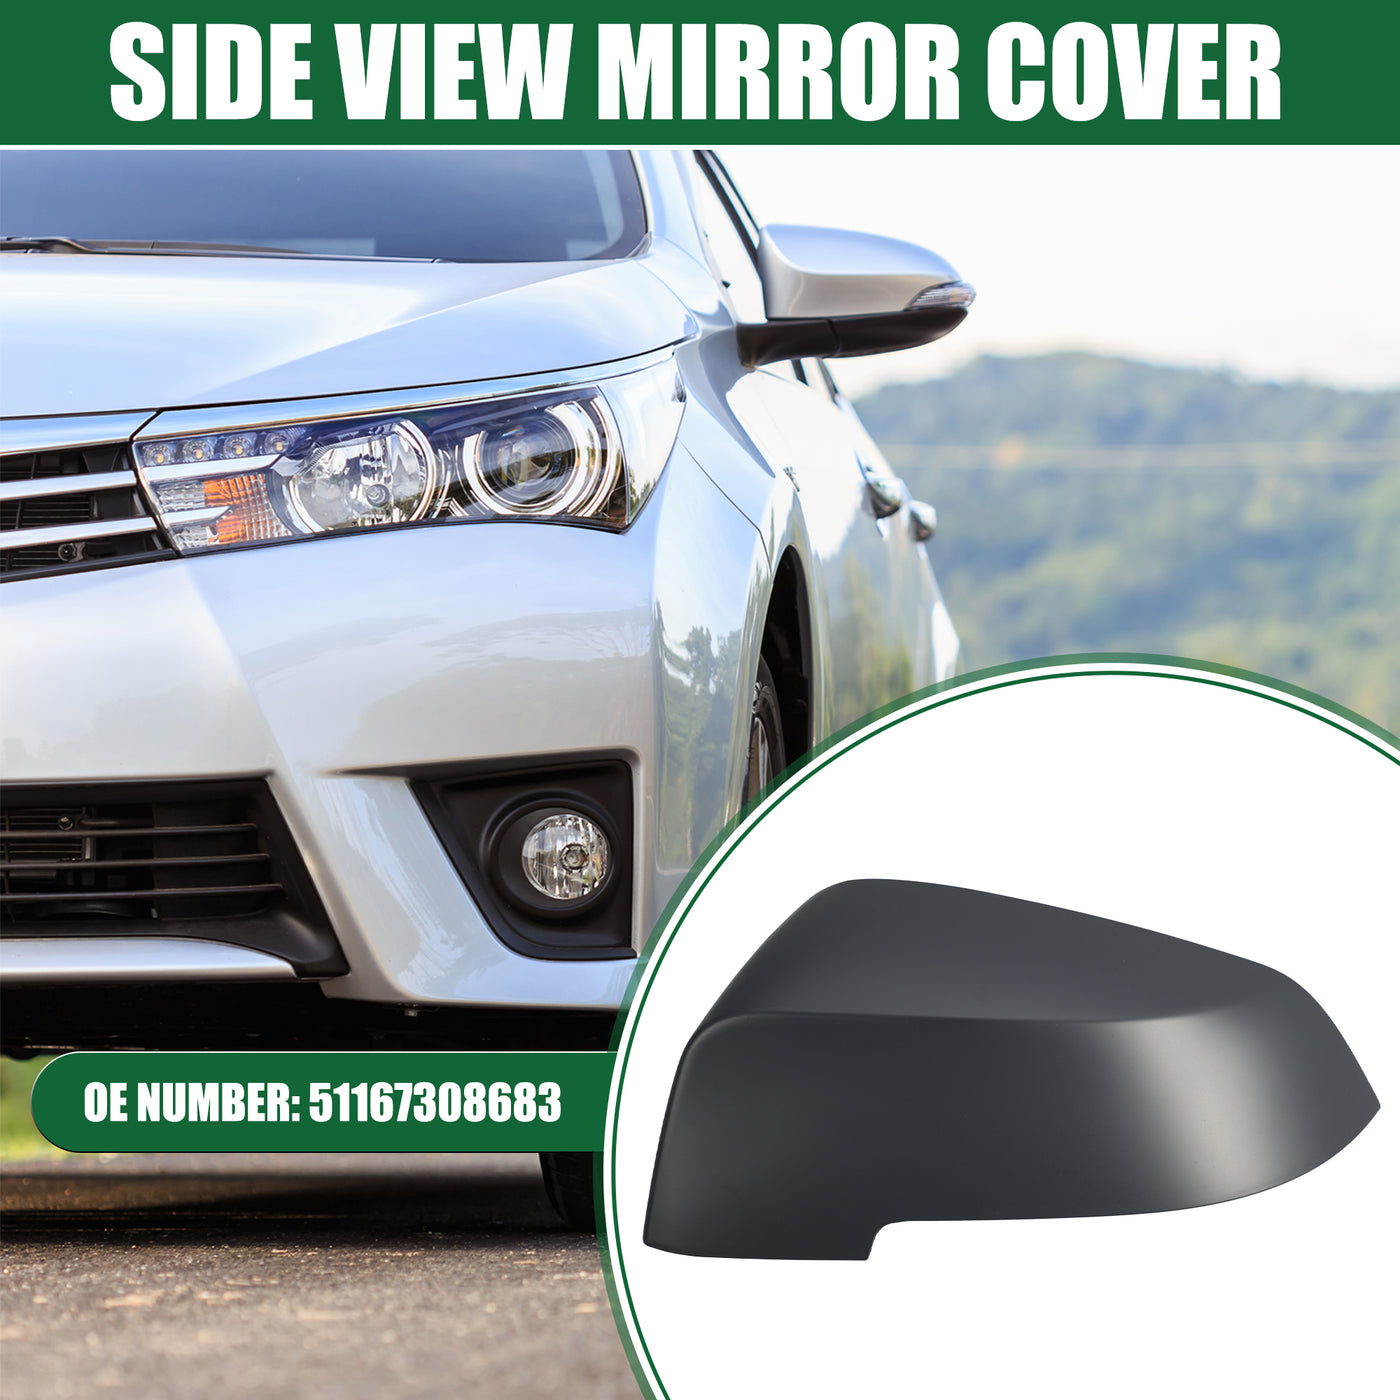 Motoforti Left Driver Side Mirror Cover, Rearview Mirror Cover Cap, for BMW 528i 2011-2016, ABS, 51167308683, Deep Gray